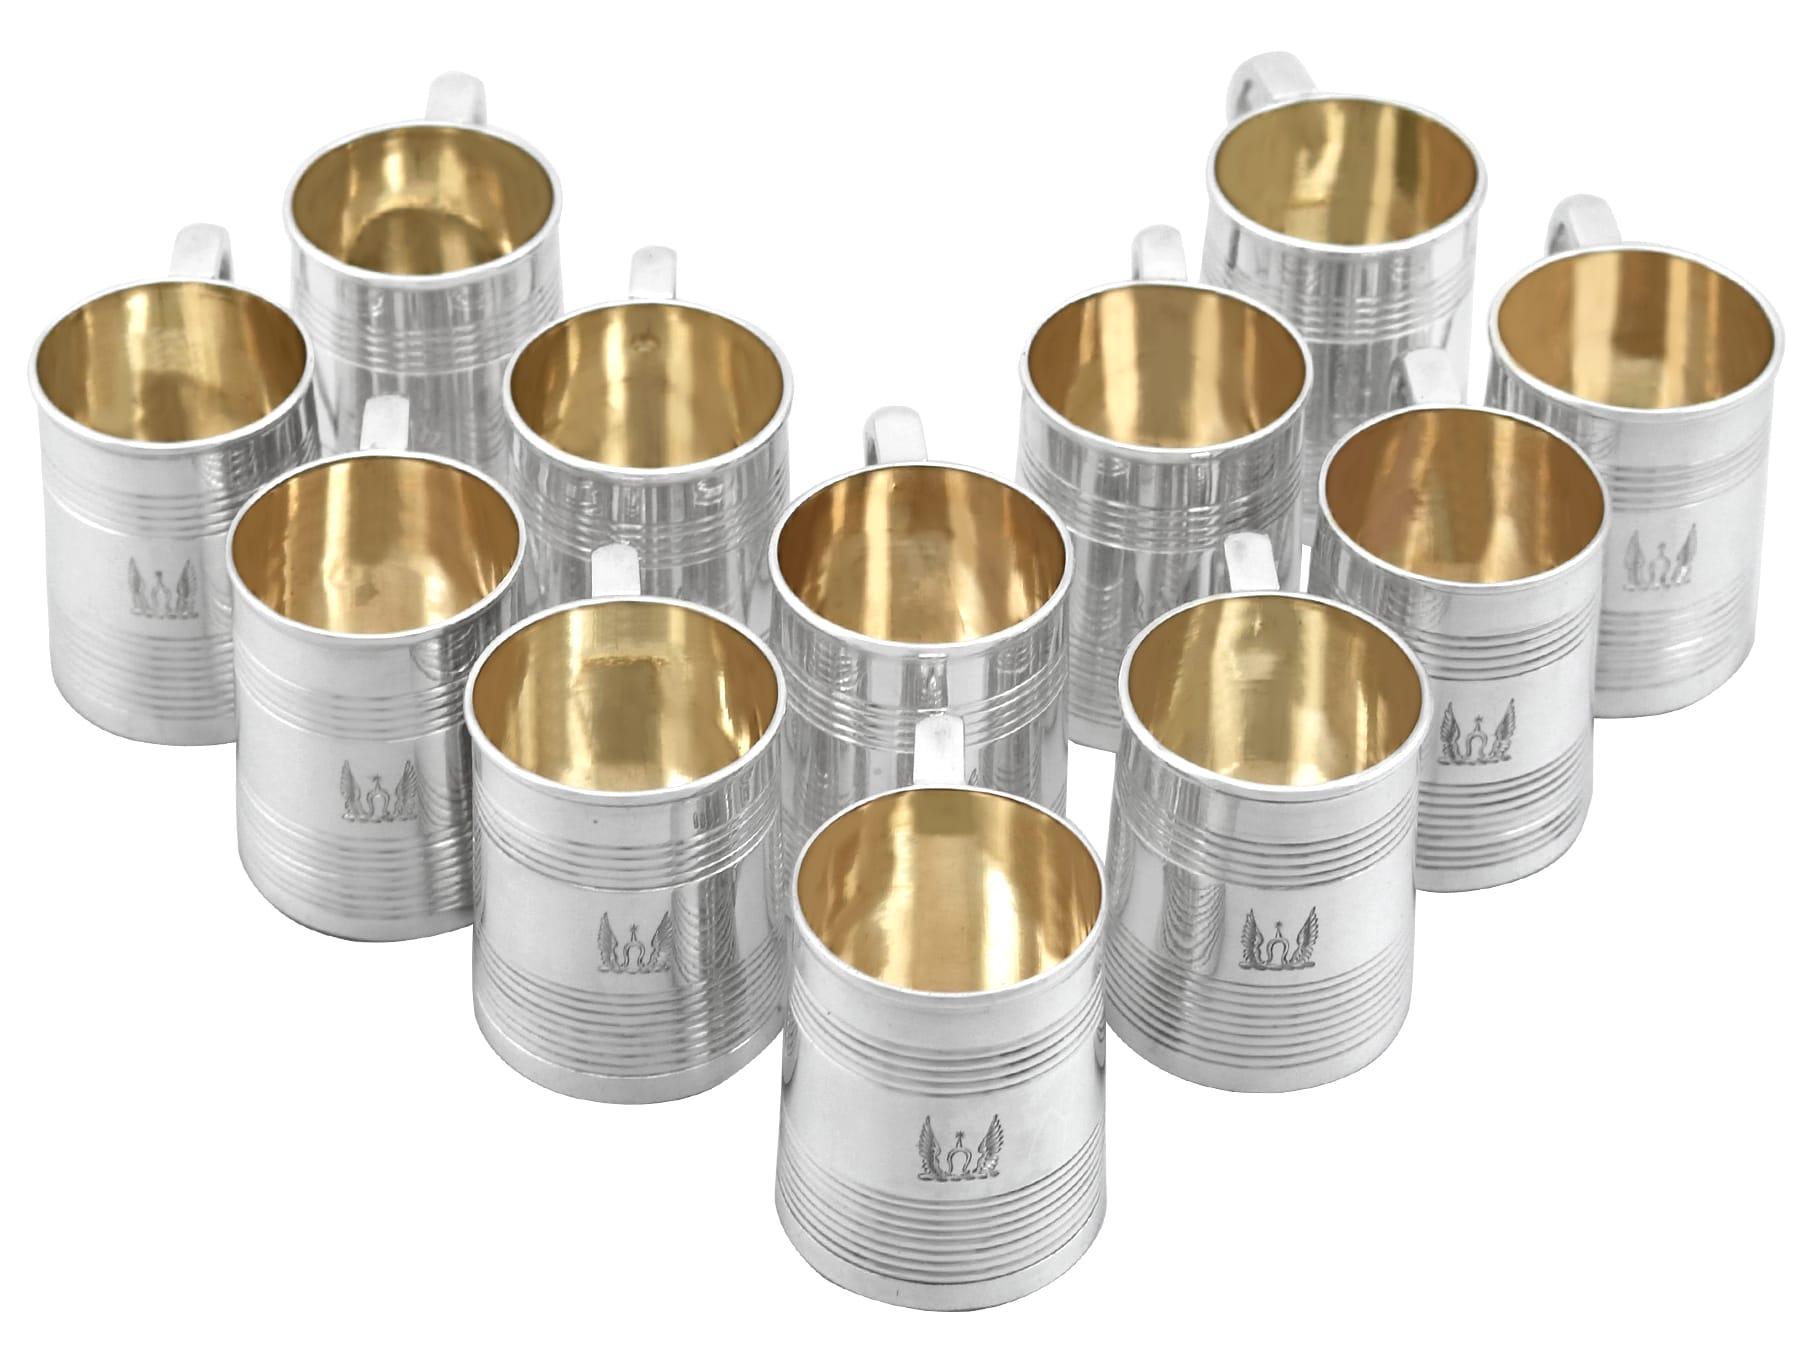 An exceptional, fine and impressive, rare set of twelve antique Victorian English sterling silver tot mugs - boxed; an addition to our range of wine and drink related silverware

These exceptional antique Victorian sterling silver mugs/tot cups have